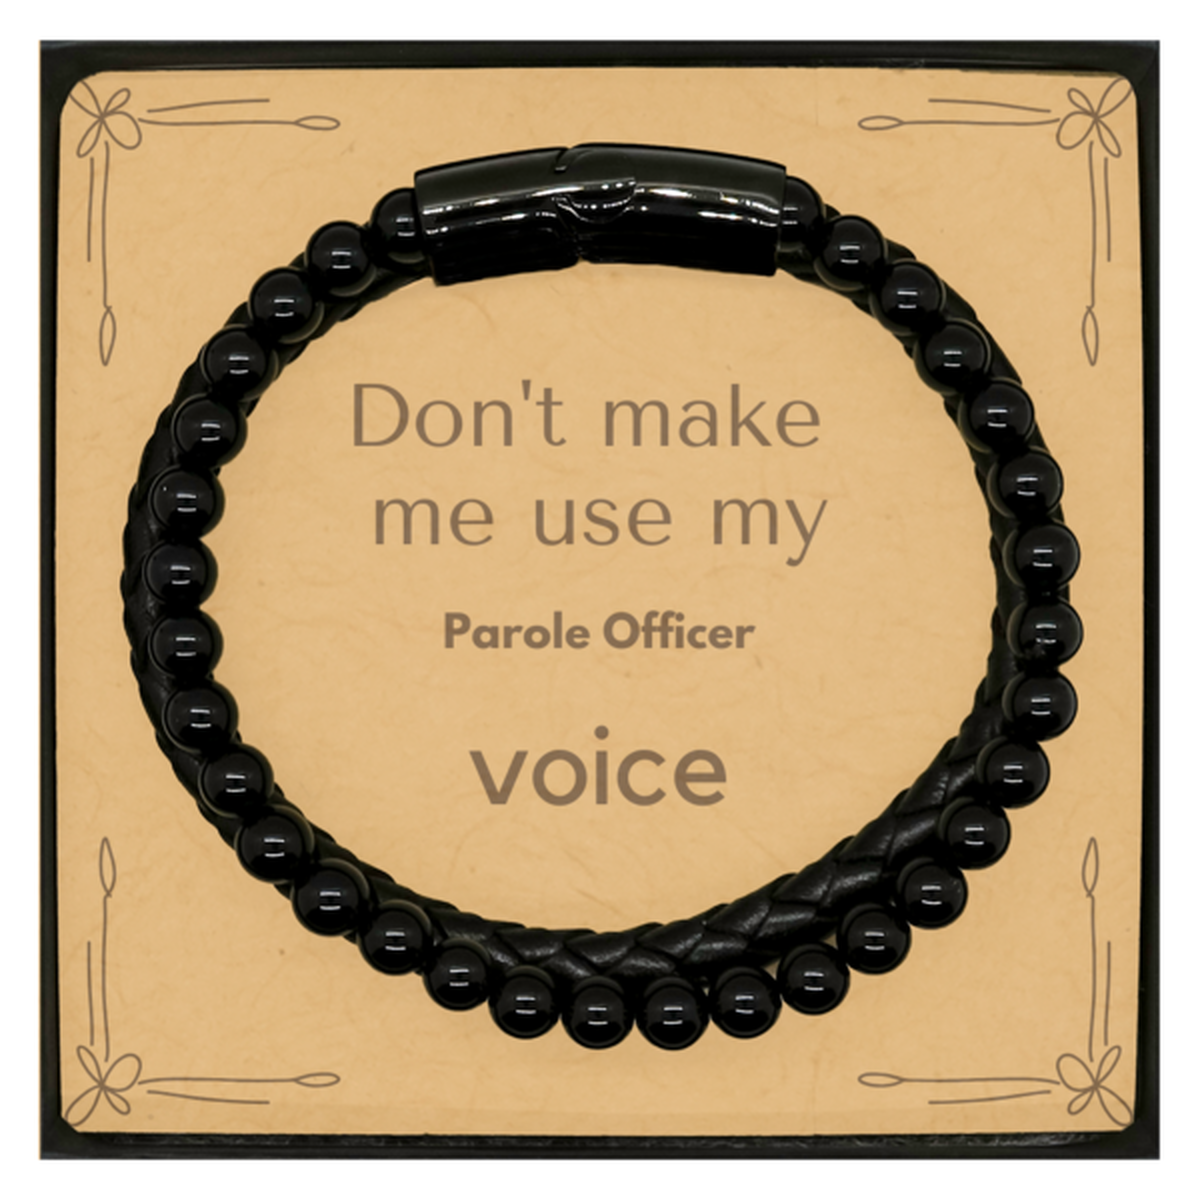 Don't make me use my Parole Officer voice, Sarcasm Parole Officer Card Gifts, Christmas Parole Officer Stone Leather Bracelets Birthday Unique Gifts For Parole Officer Coworkers, Men, Women, Colleague, Friends